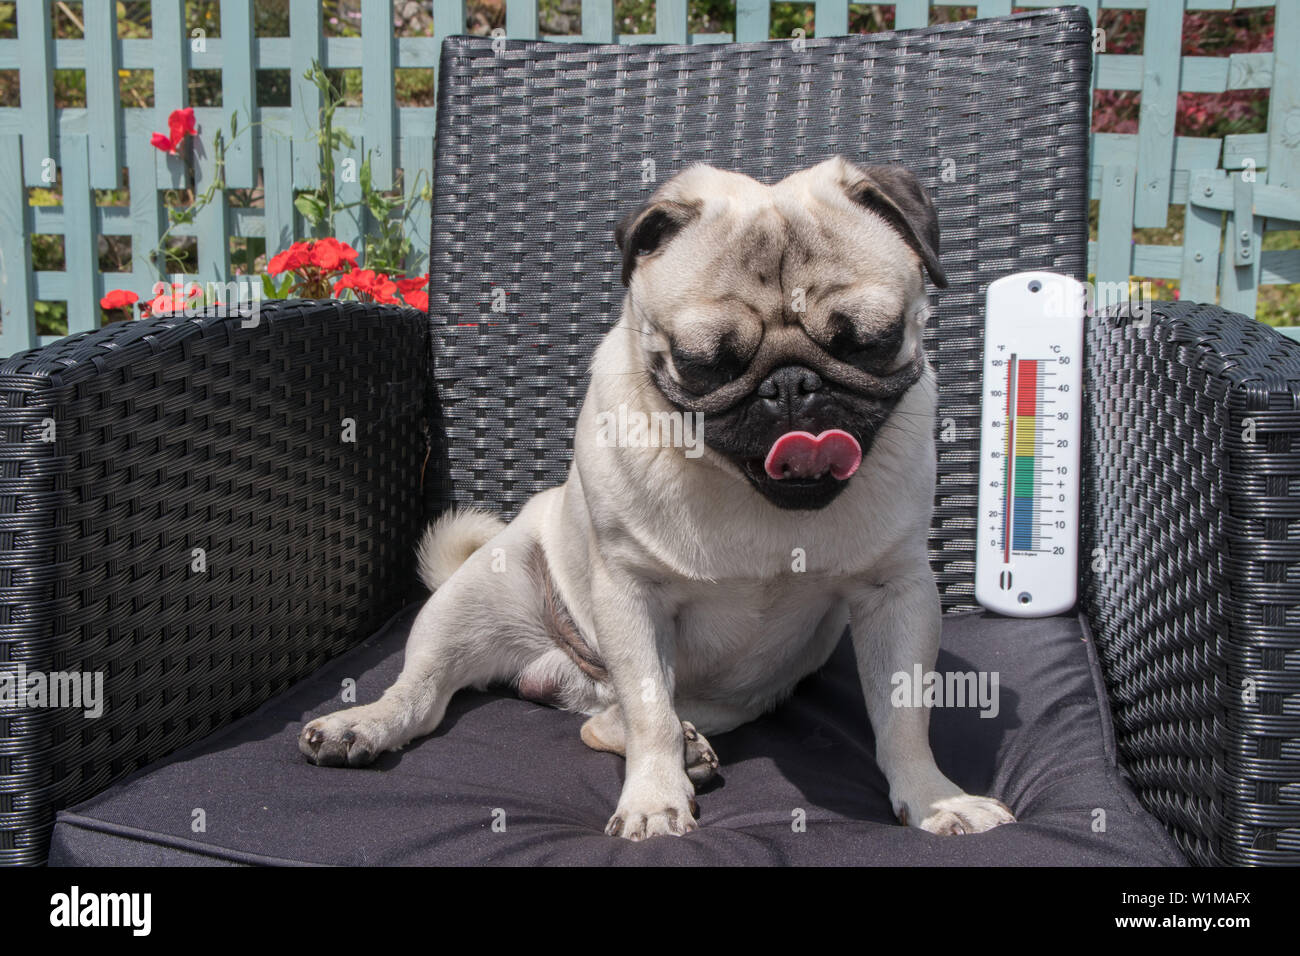 Pug Dog Sitting On Chair Wearing Sunglasses Panting In Hot